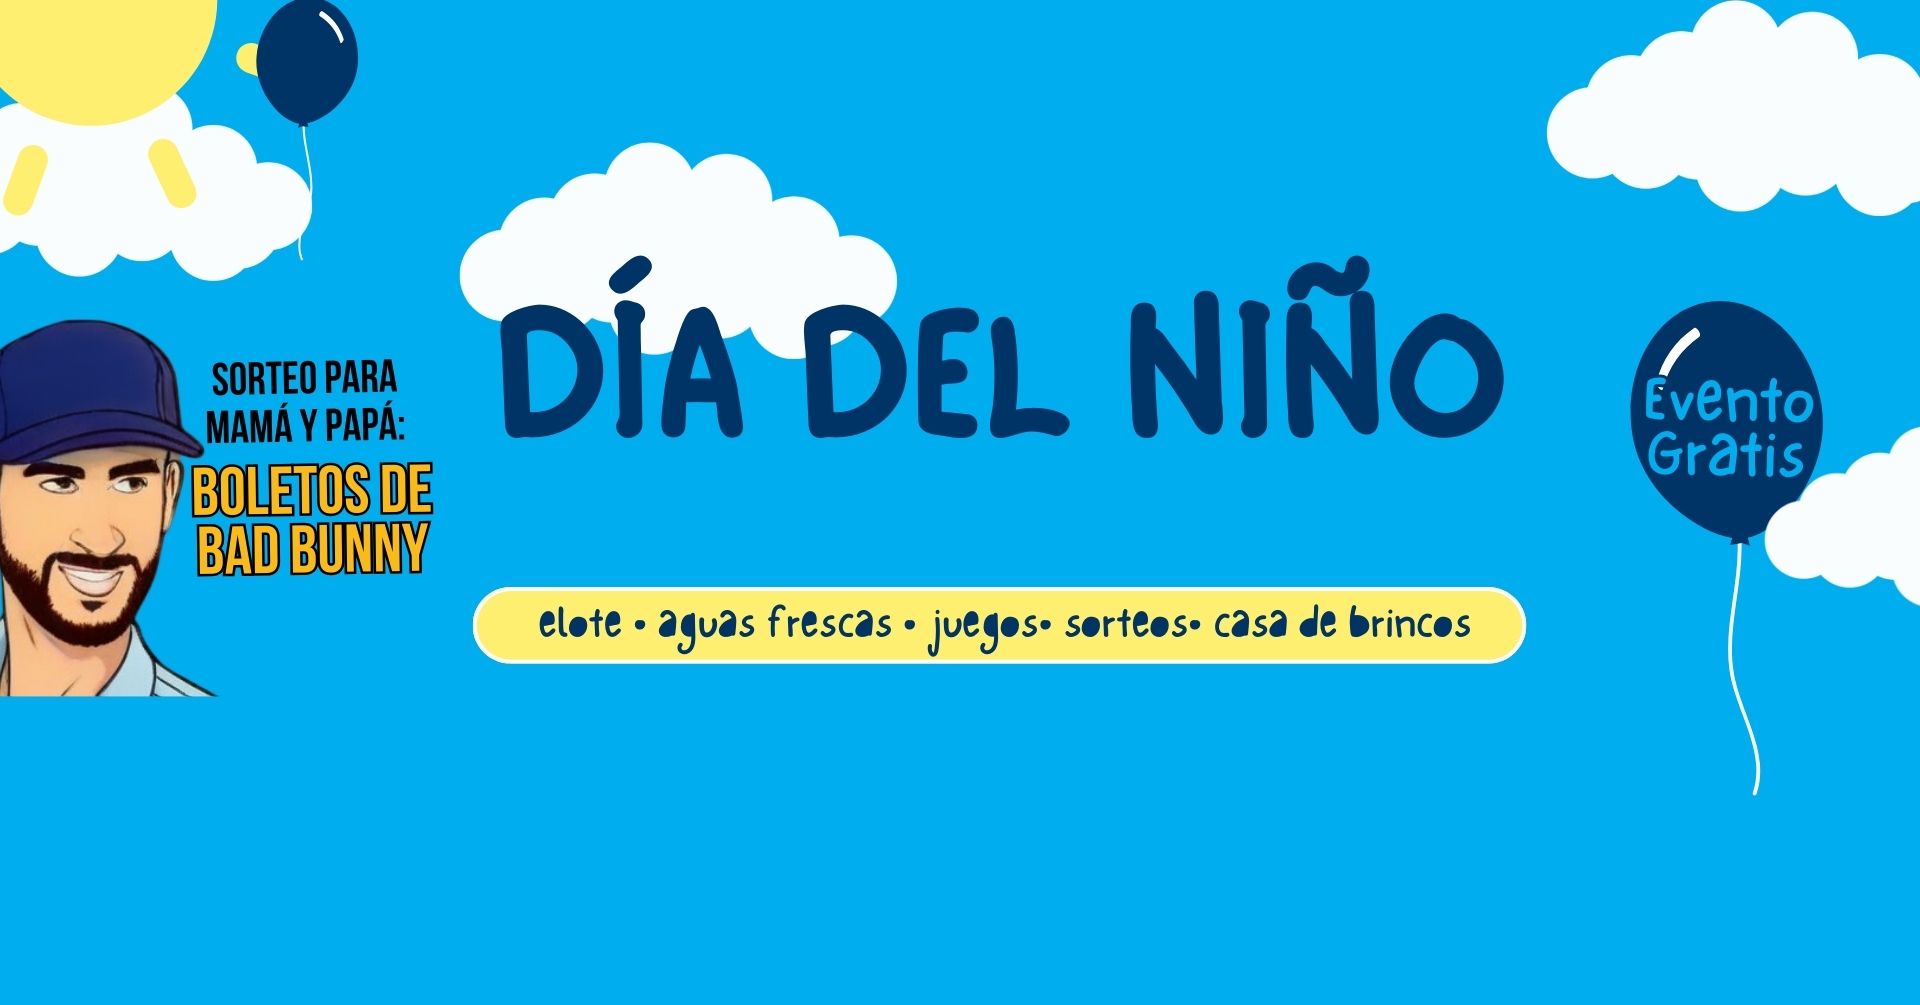 Día del Niño party with at purpose at the carlson law firm killeen